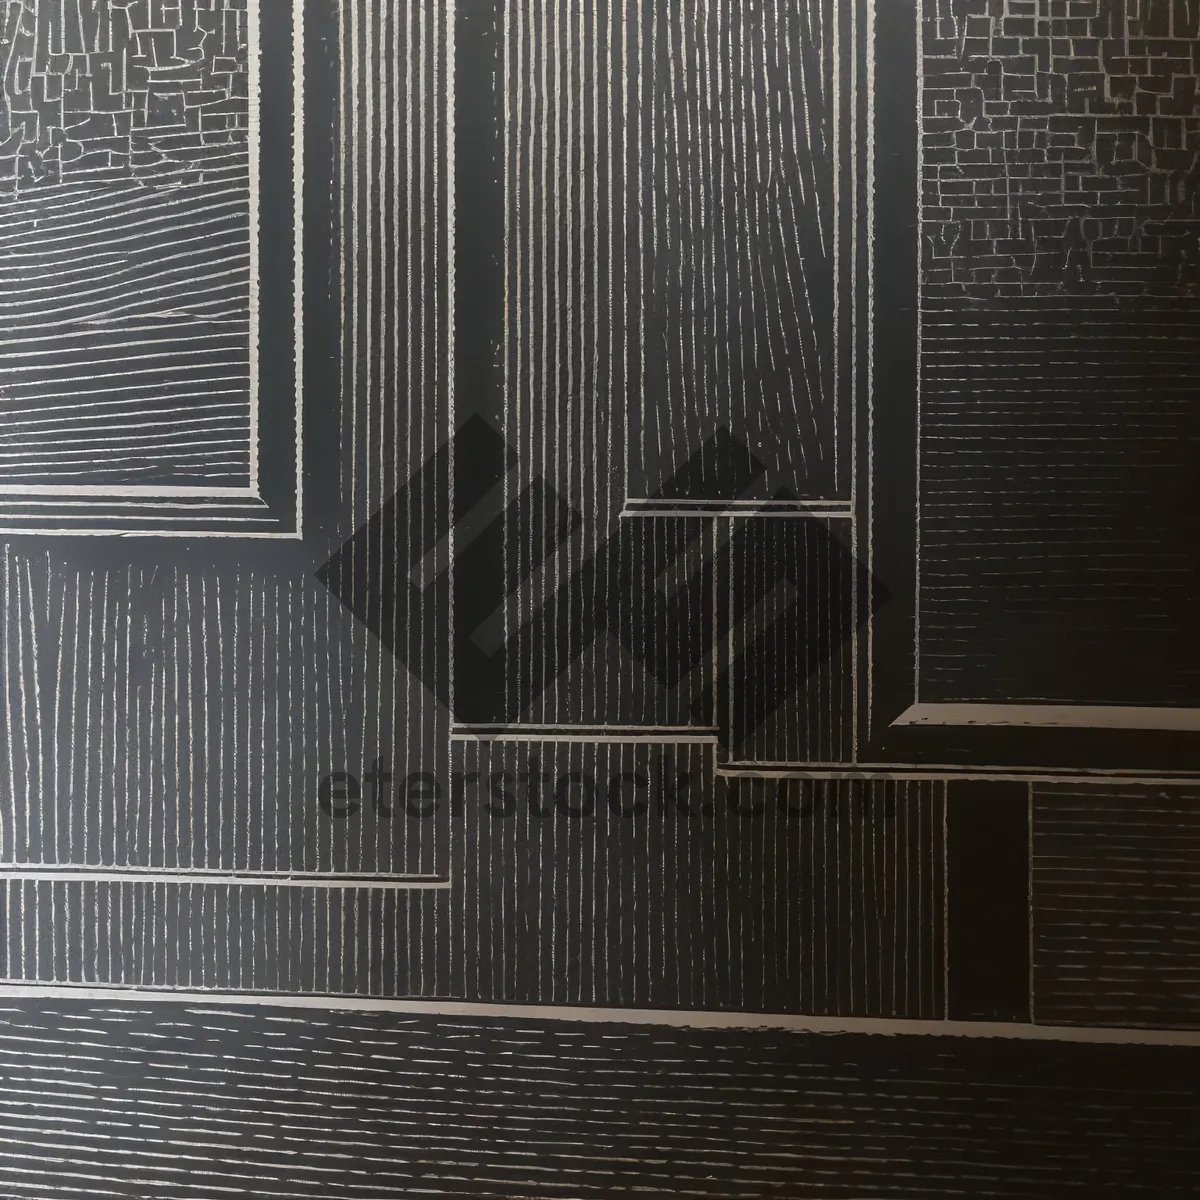 Picture of Textured Metal Radiator with Grunge Design